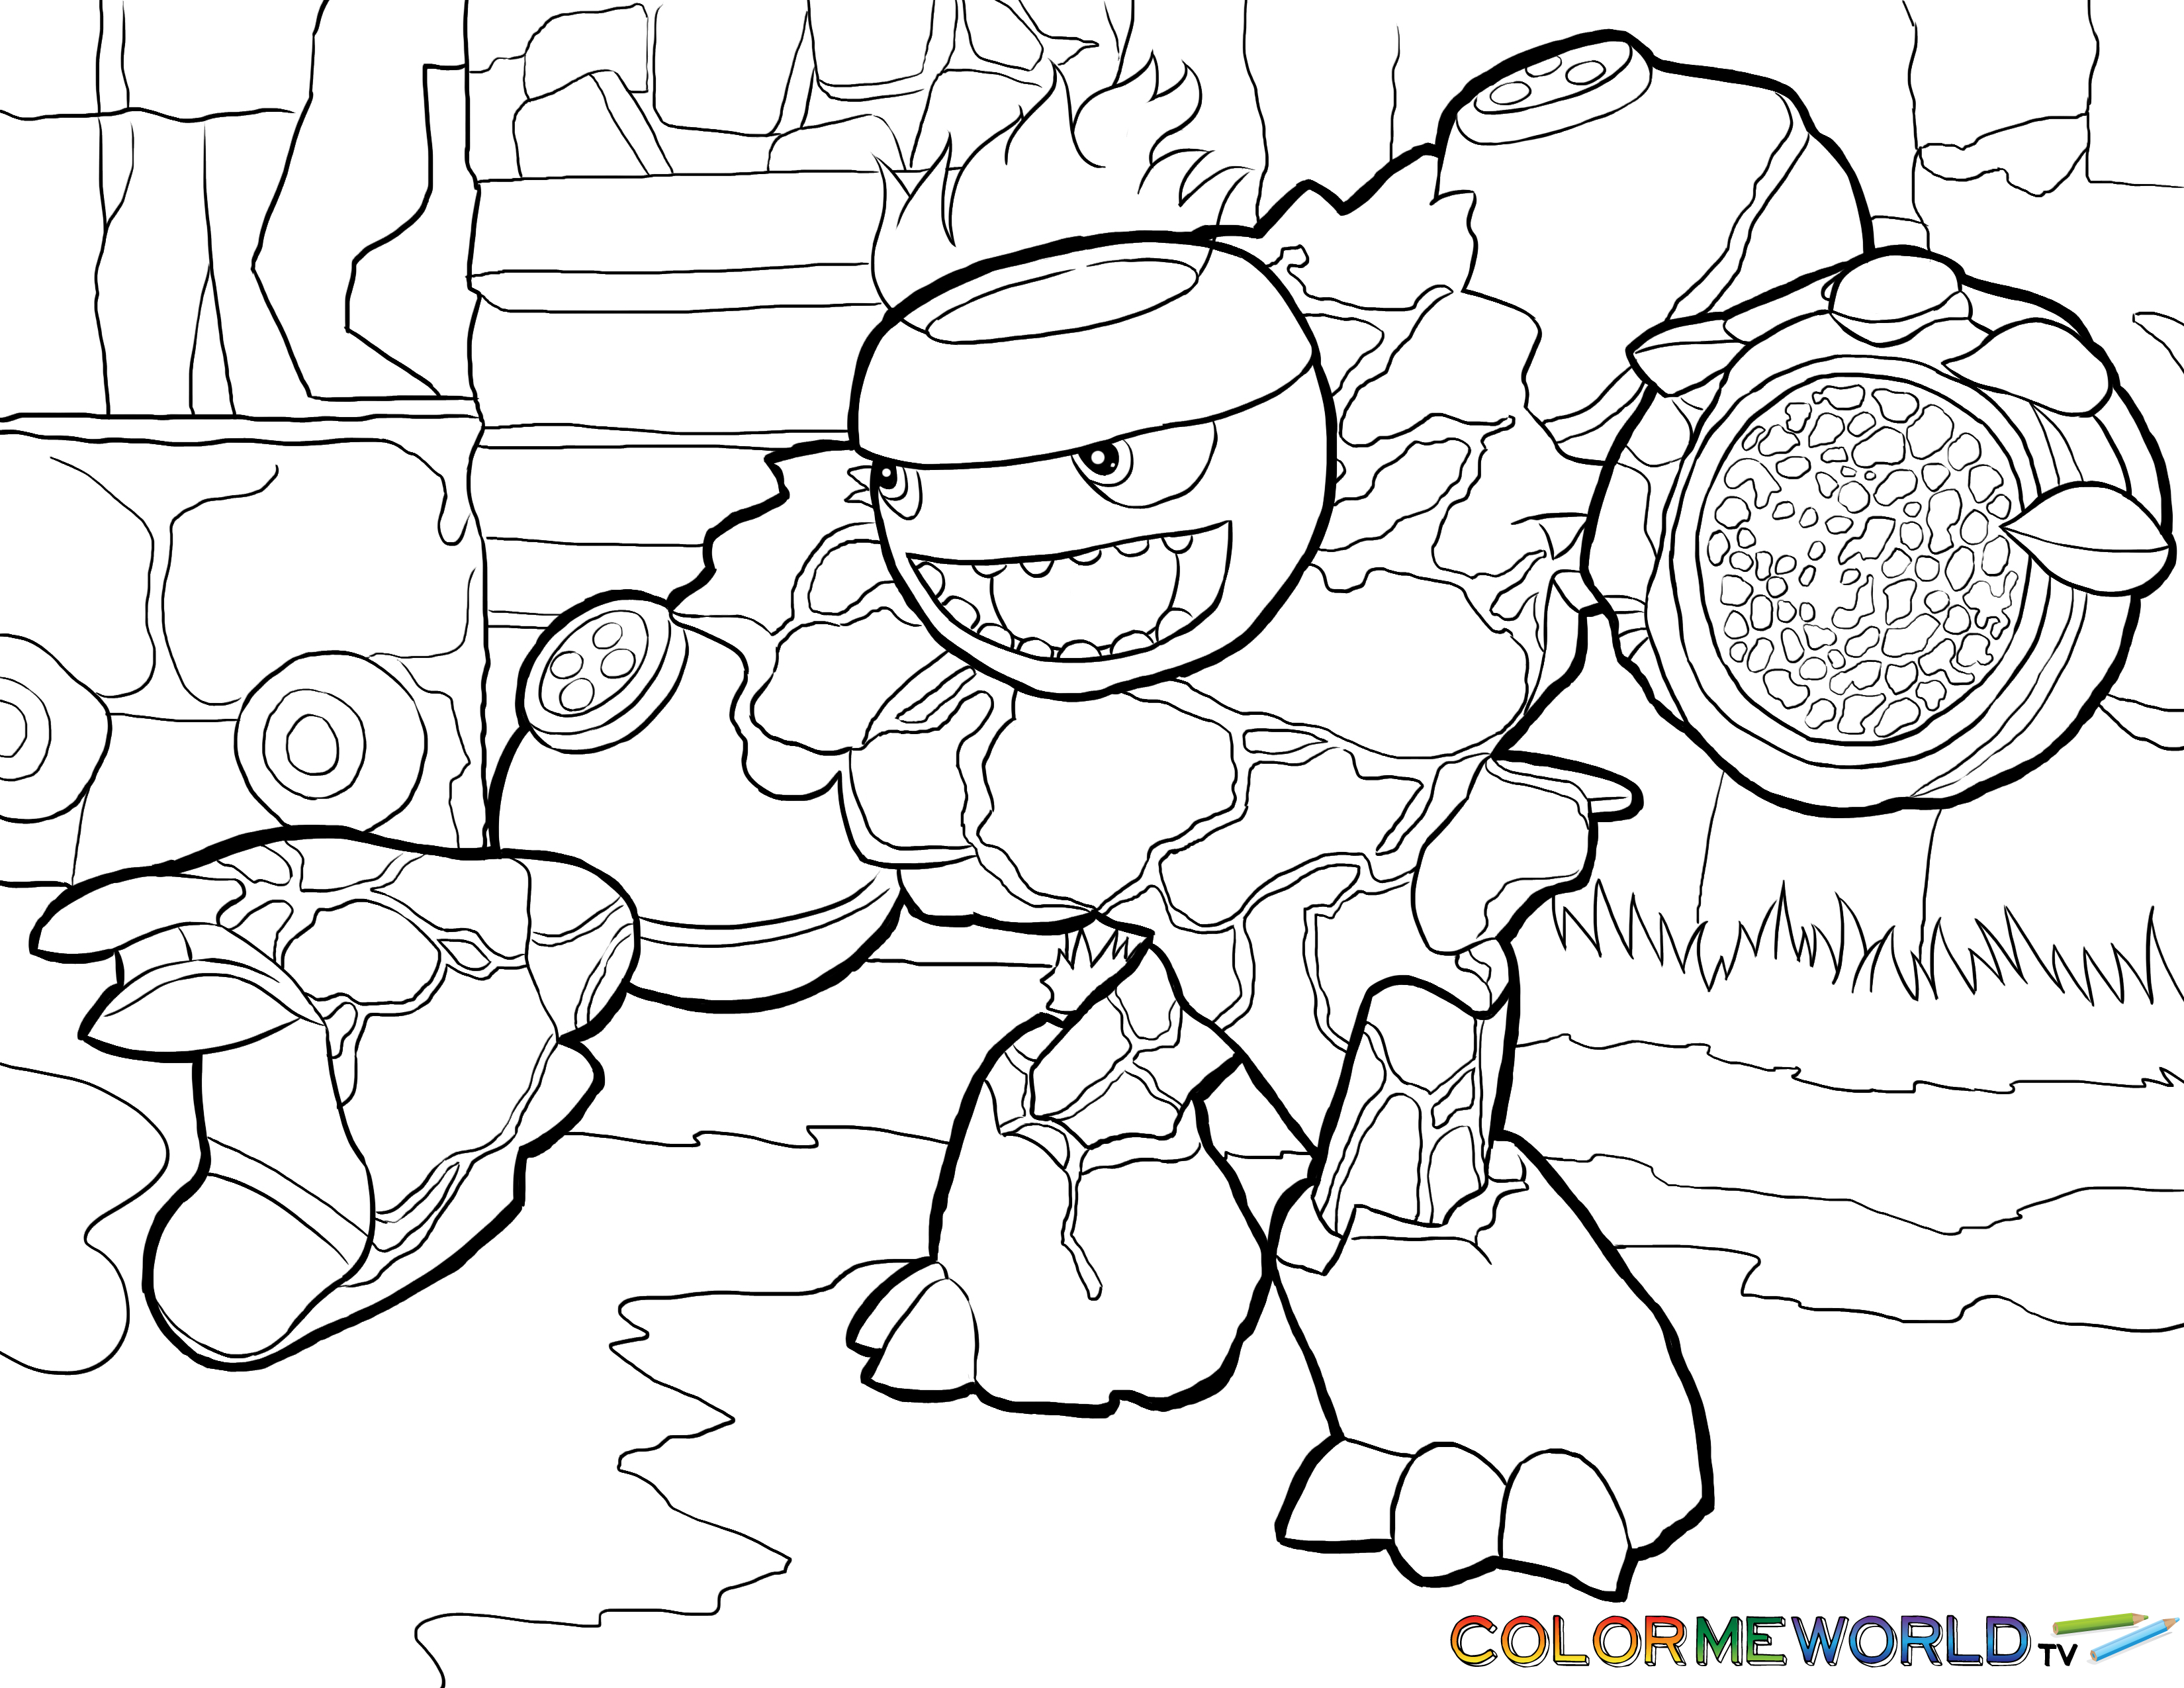 693 Simple Coloring Pages Skylanders Superchargers for Adult